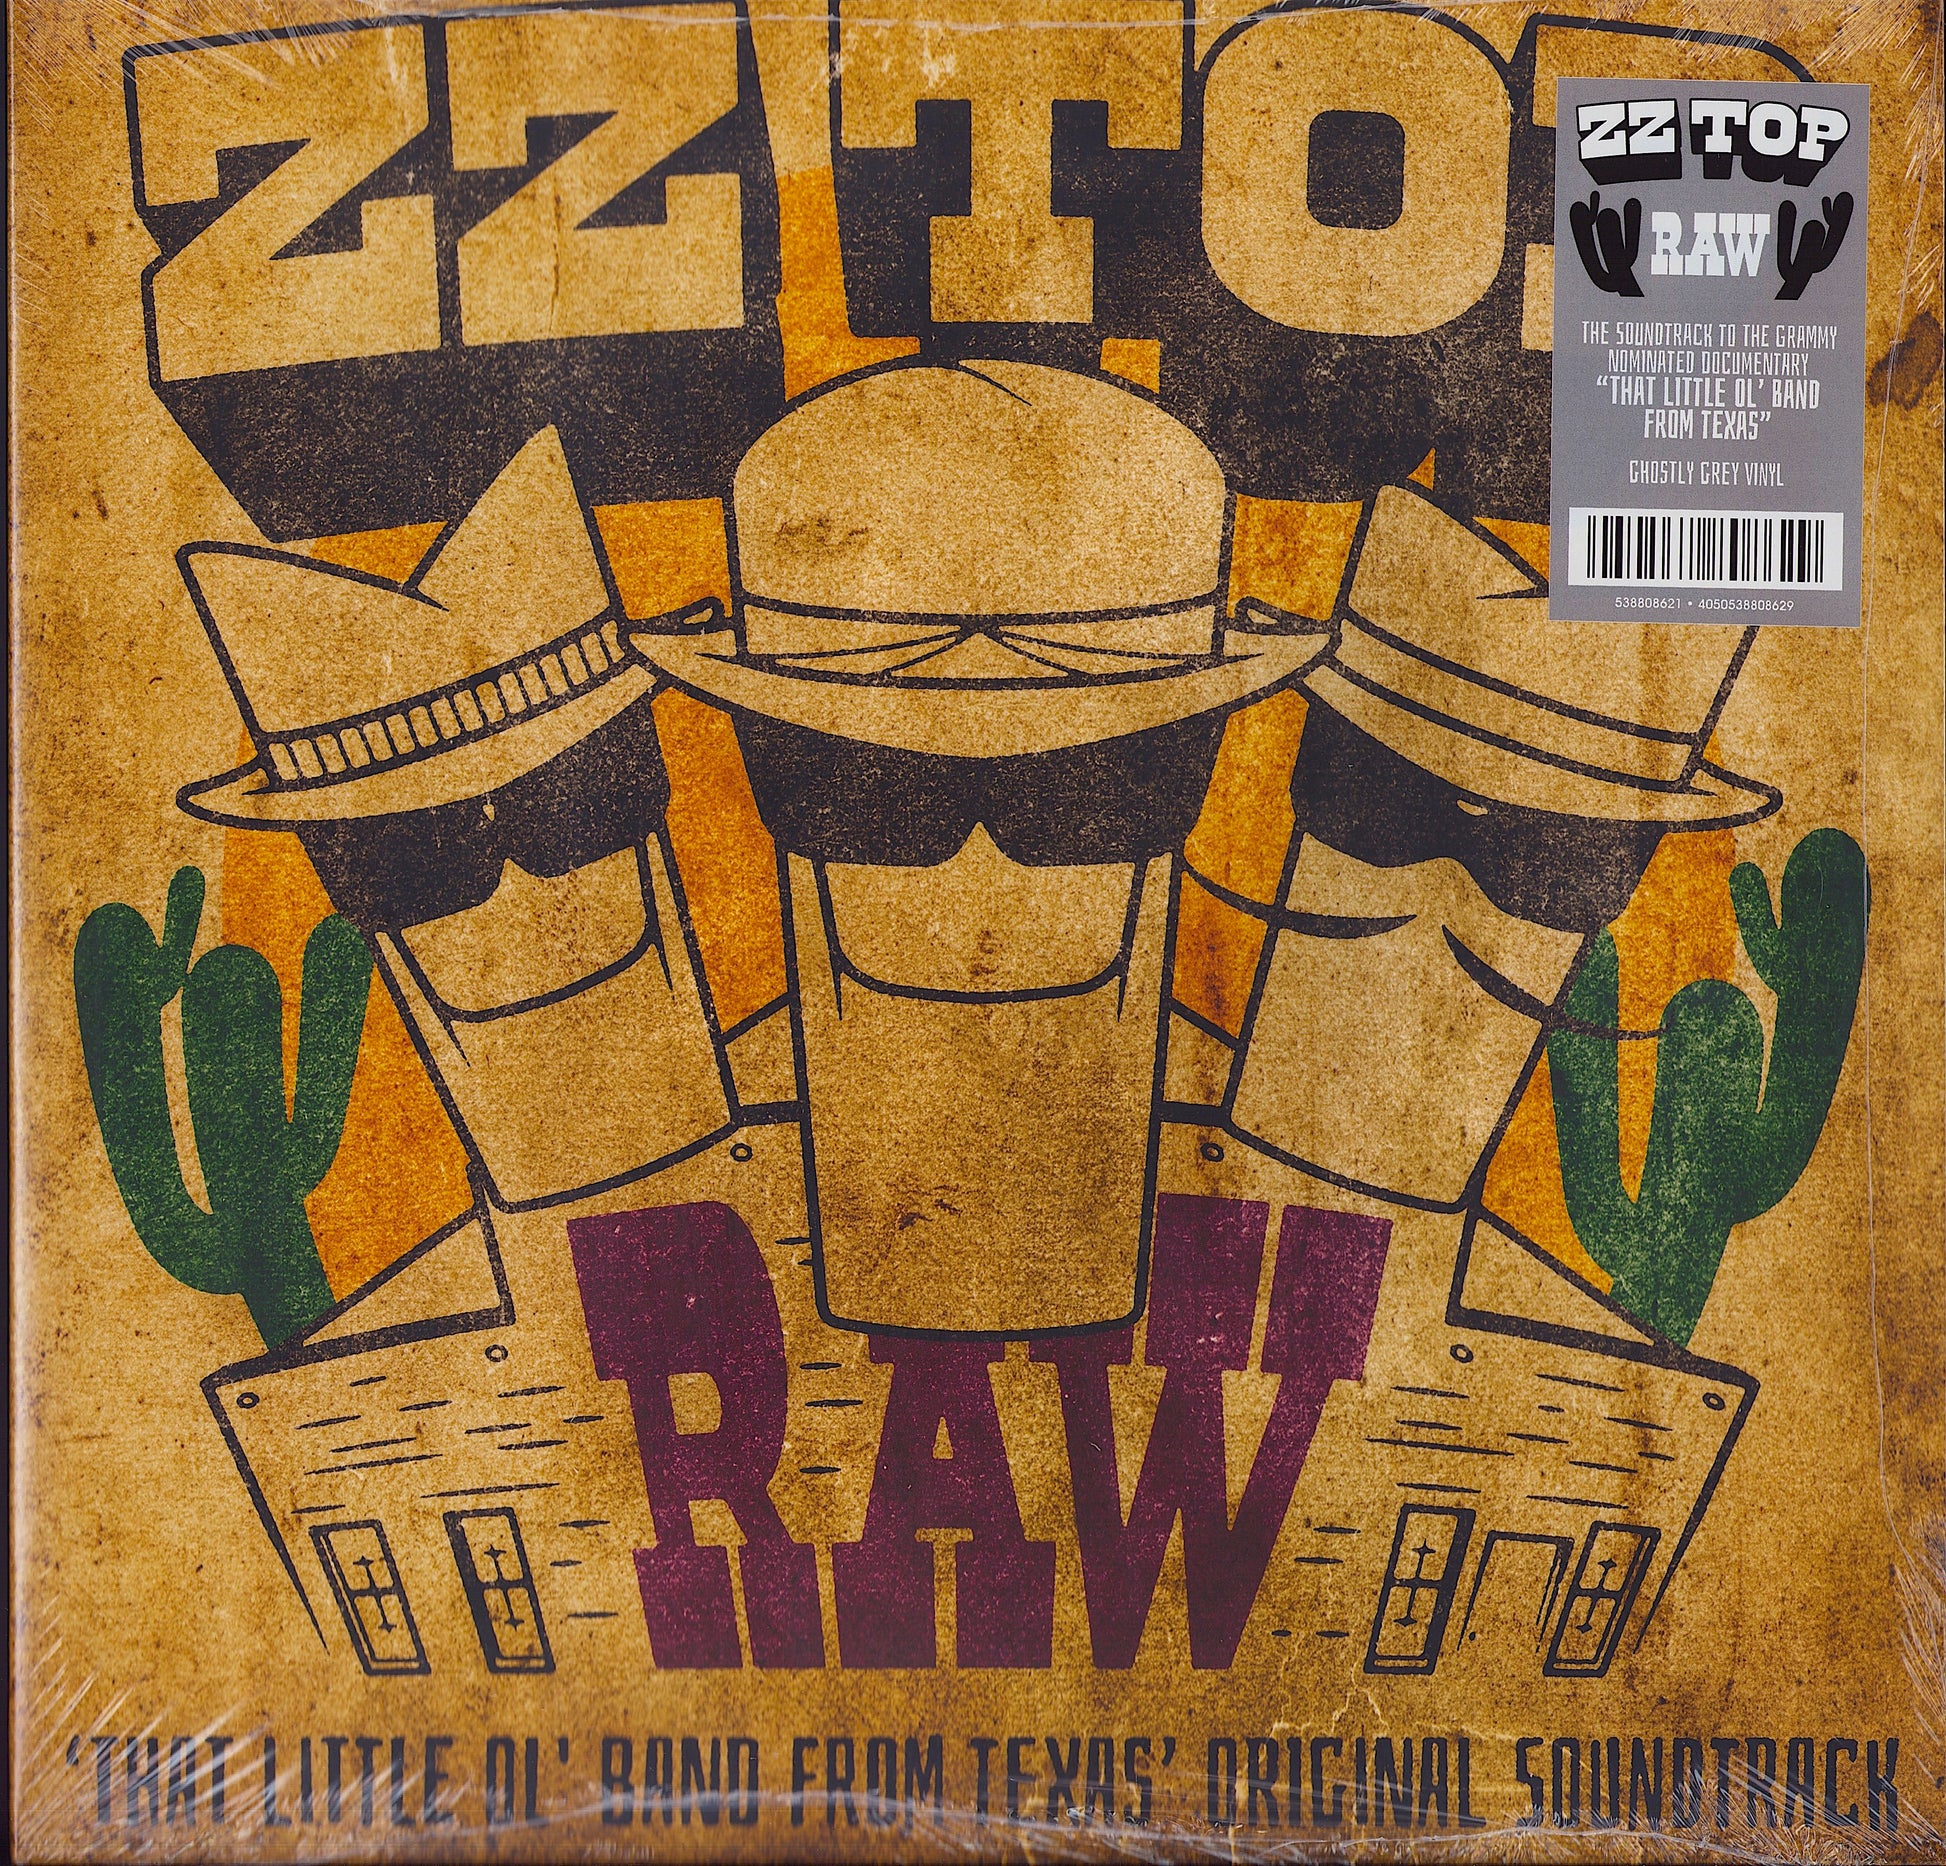 ZZ Top ‎- Raw 'That Little Ol' Band From Texas' Original Soundtrack Ghostly Grey Vinyl LP